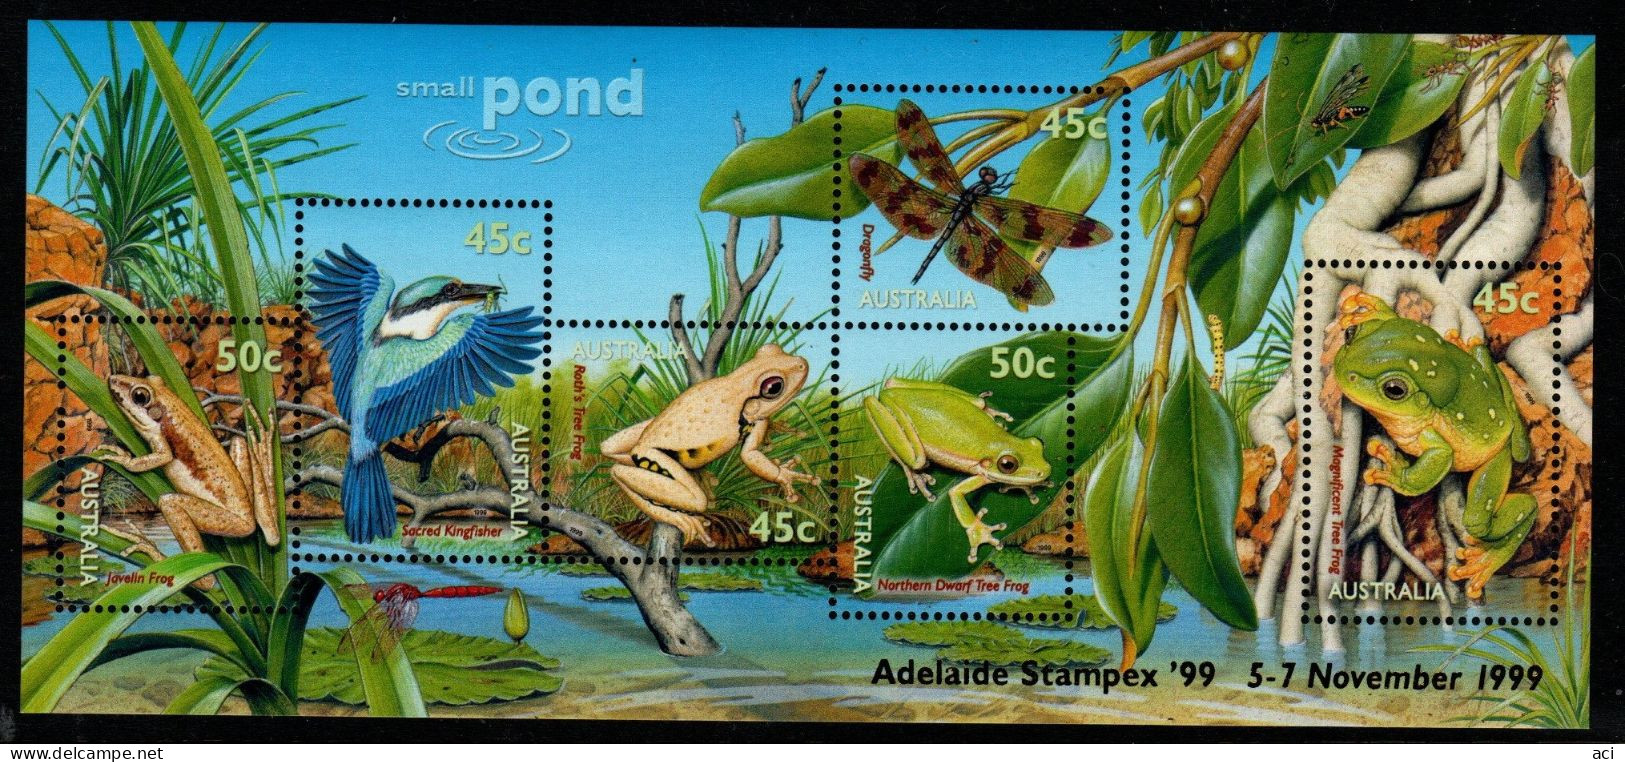 Australia  1999 Small Pond Opt Adelaide Stampex99 In Gold ,souvenir Sheet,,Mint Never Hinged - Ungebraucht